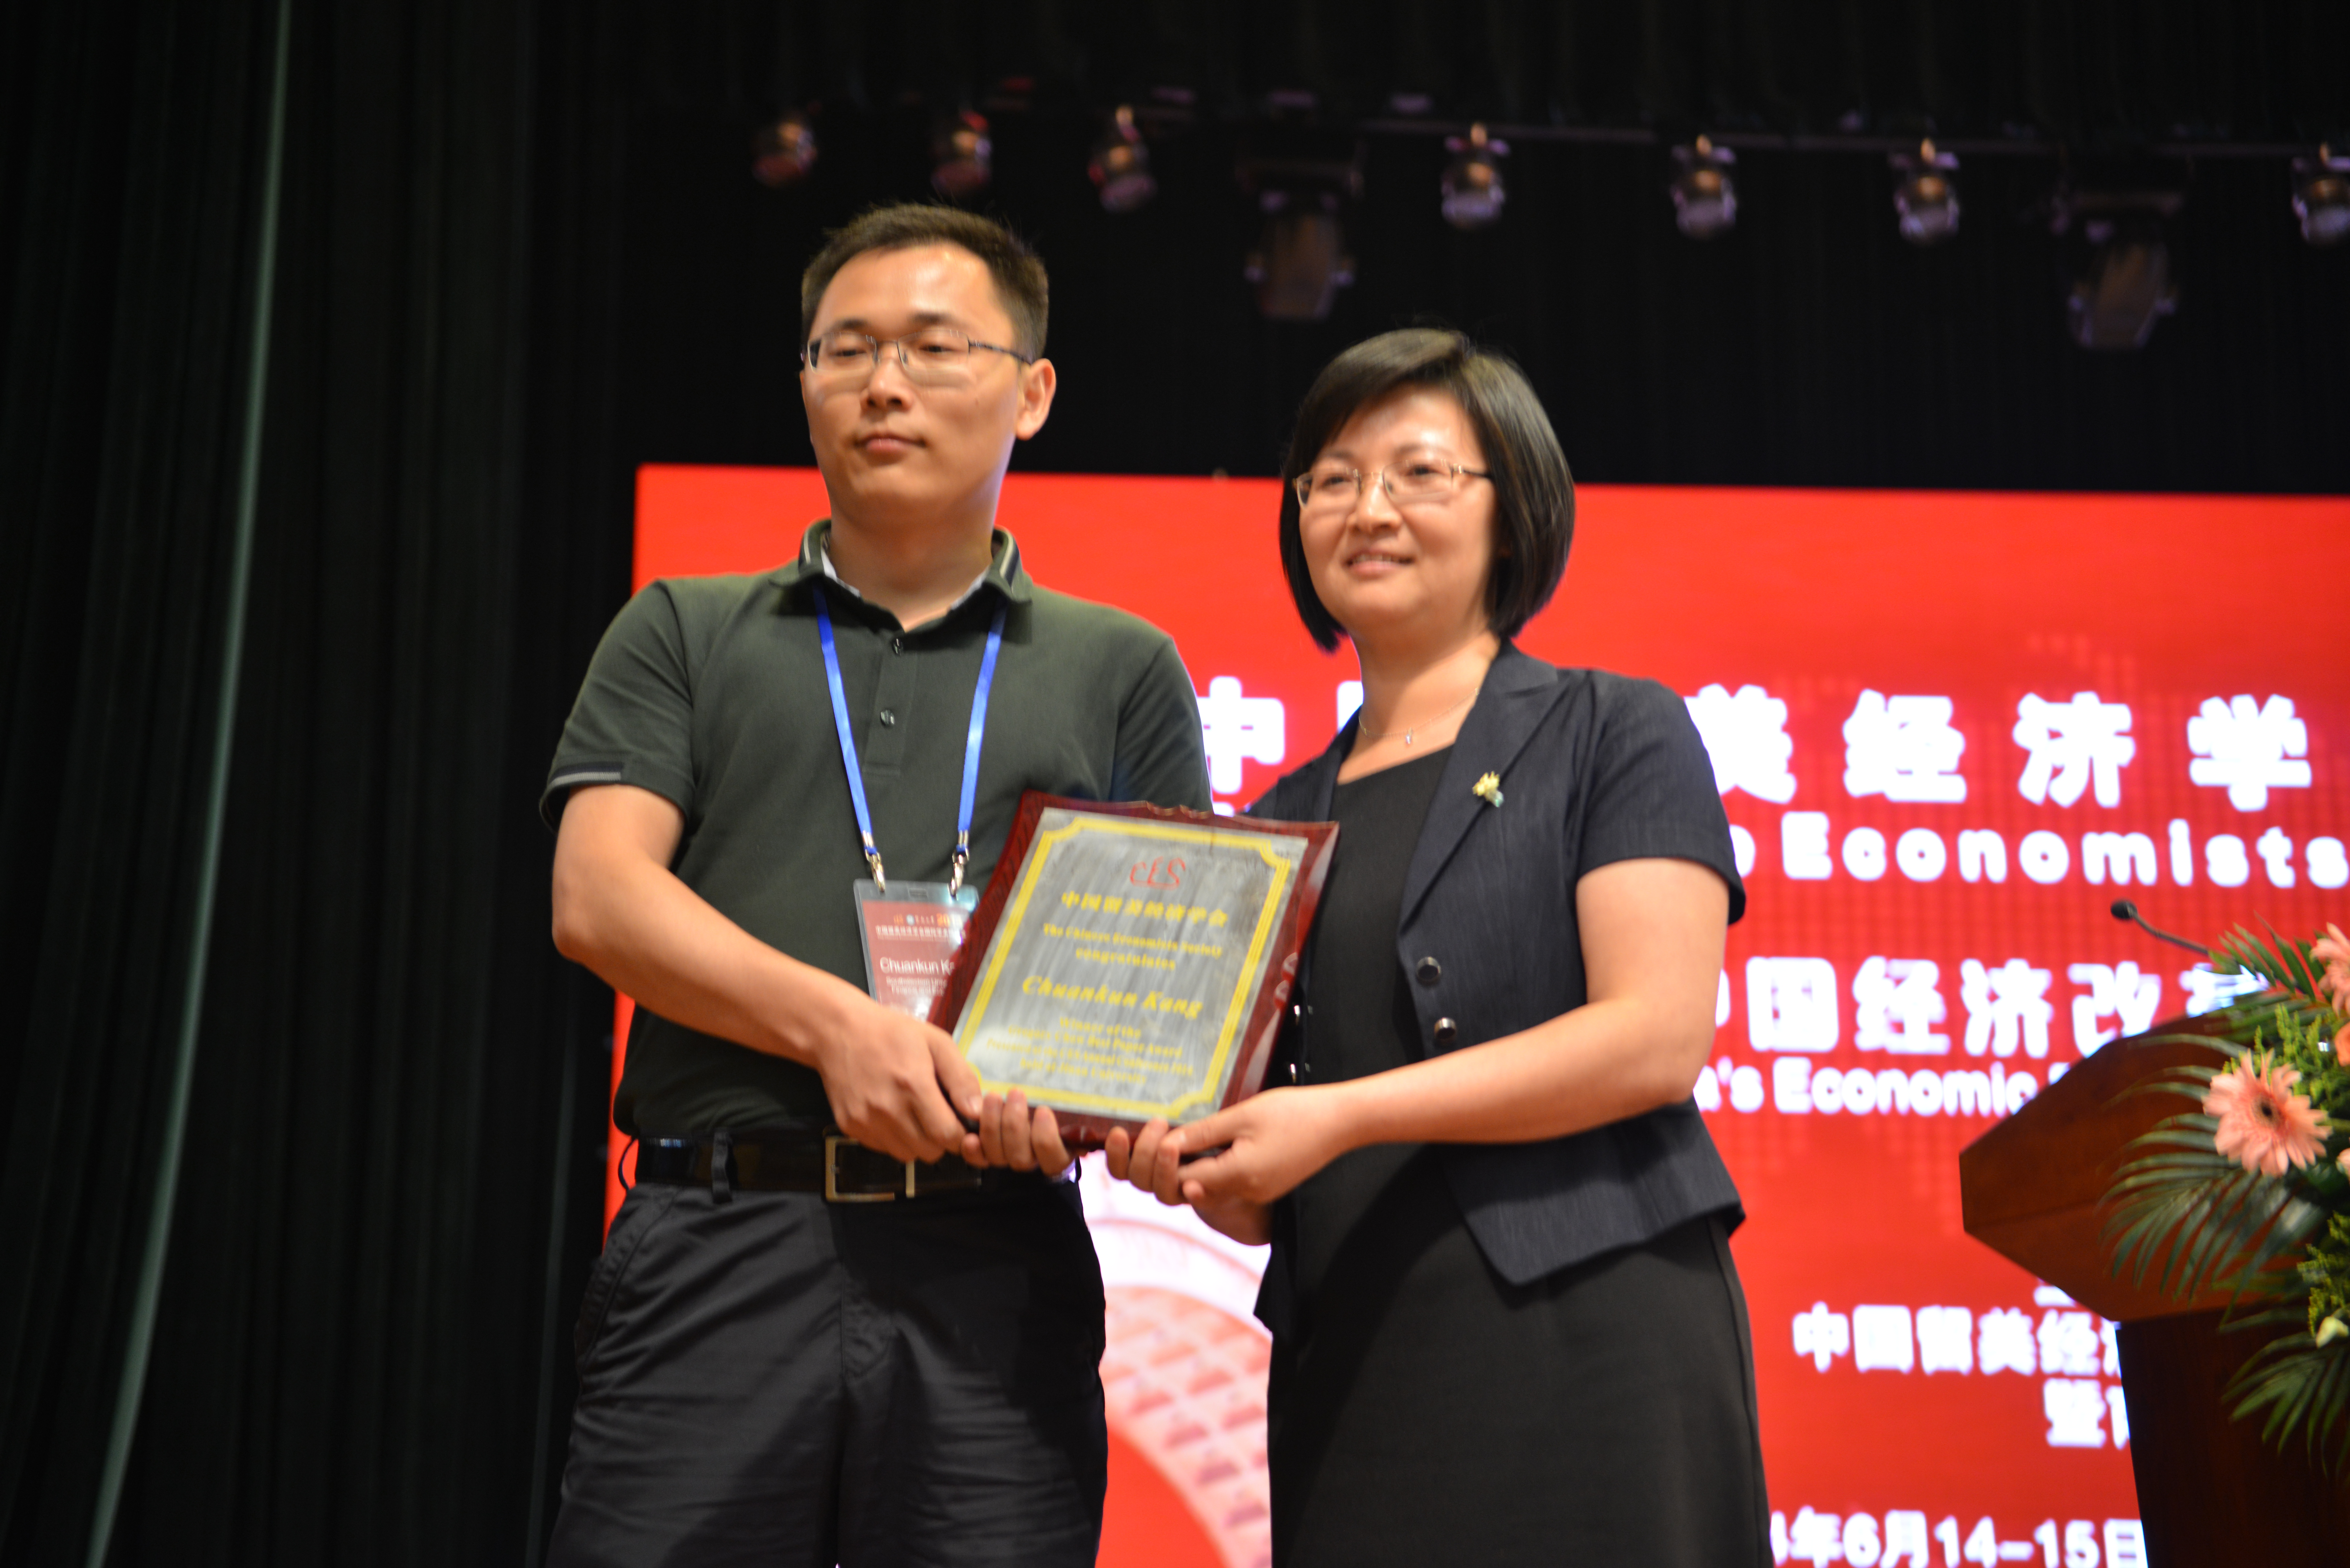 CES President presents best paper award to Chuankun Kang